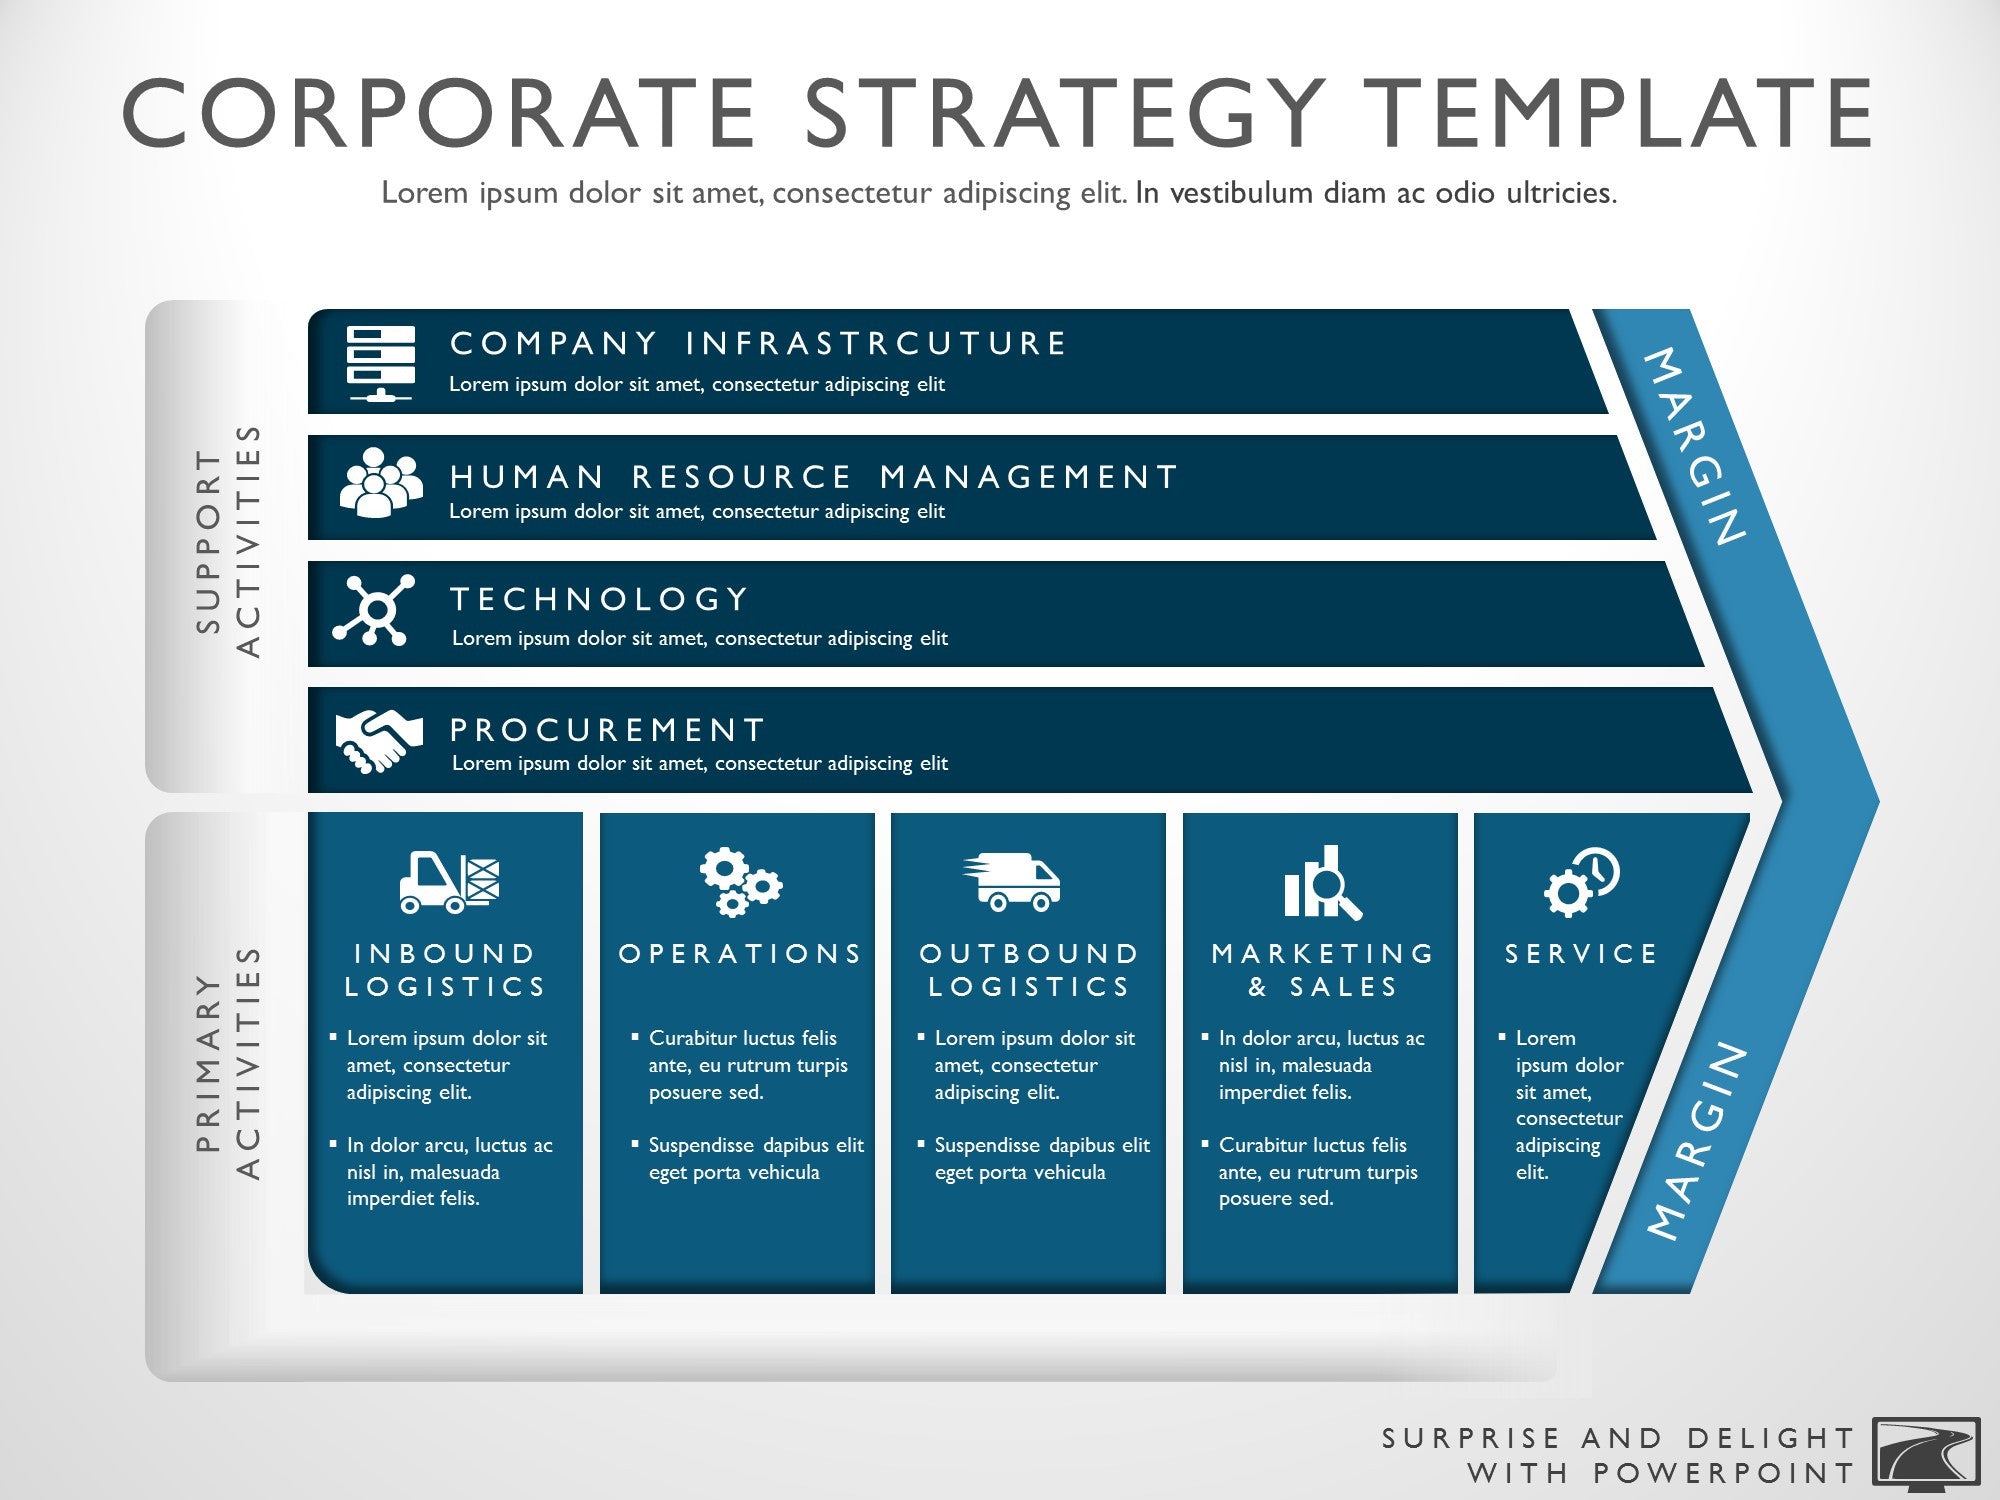 corporate strategy presentation examples